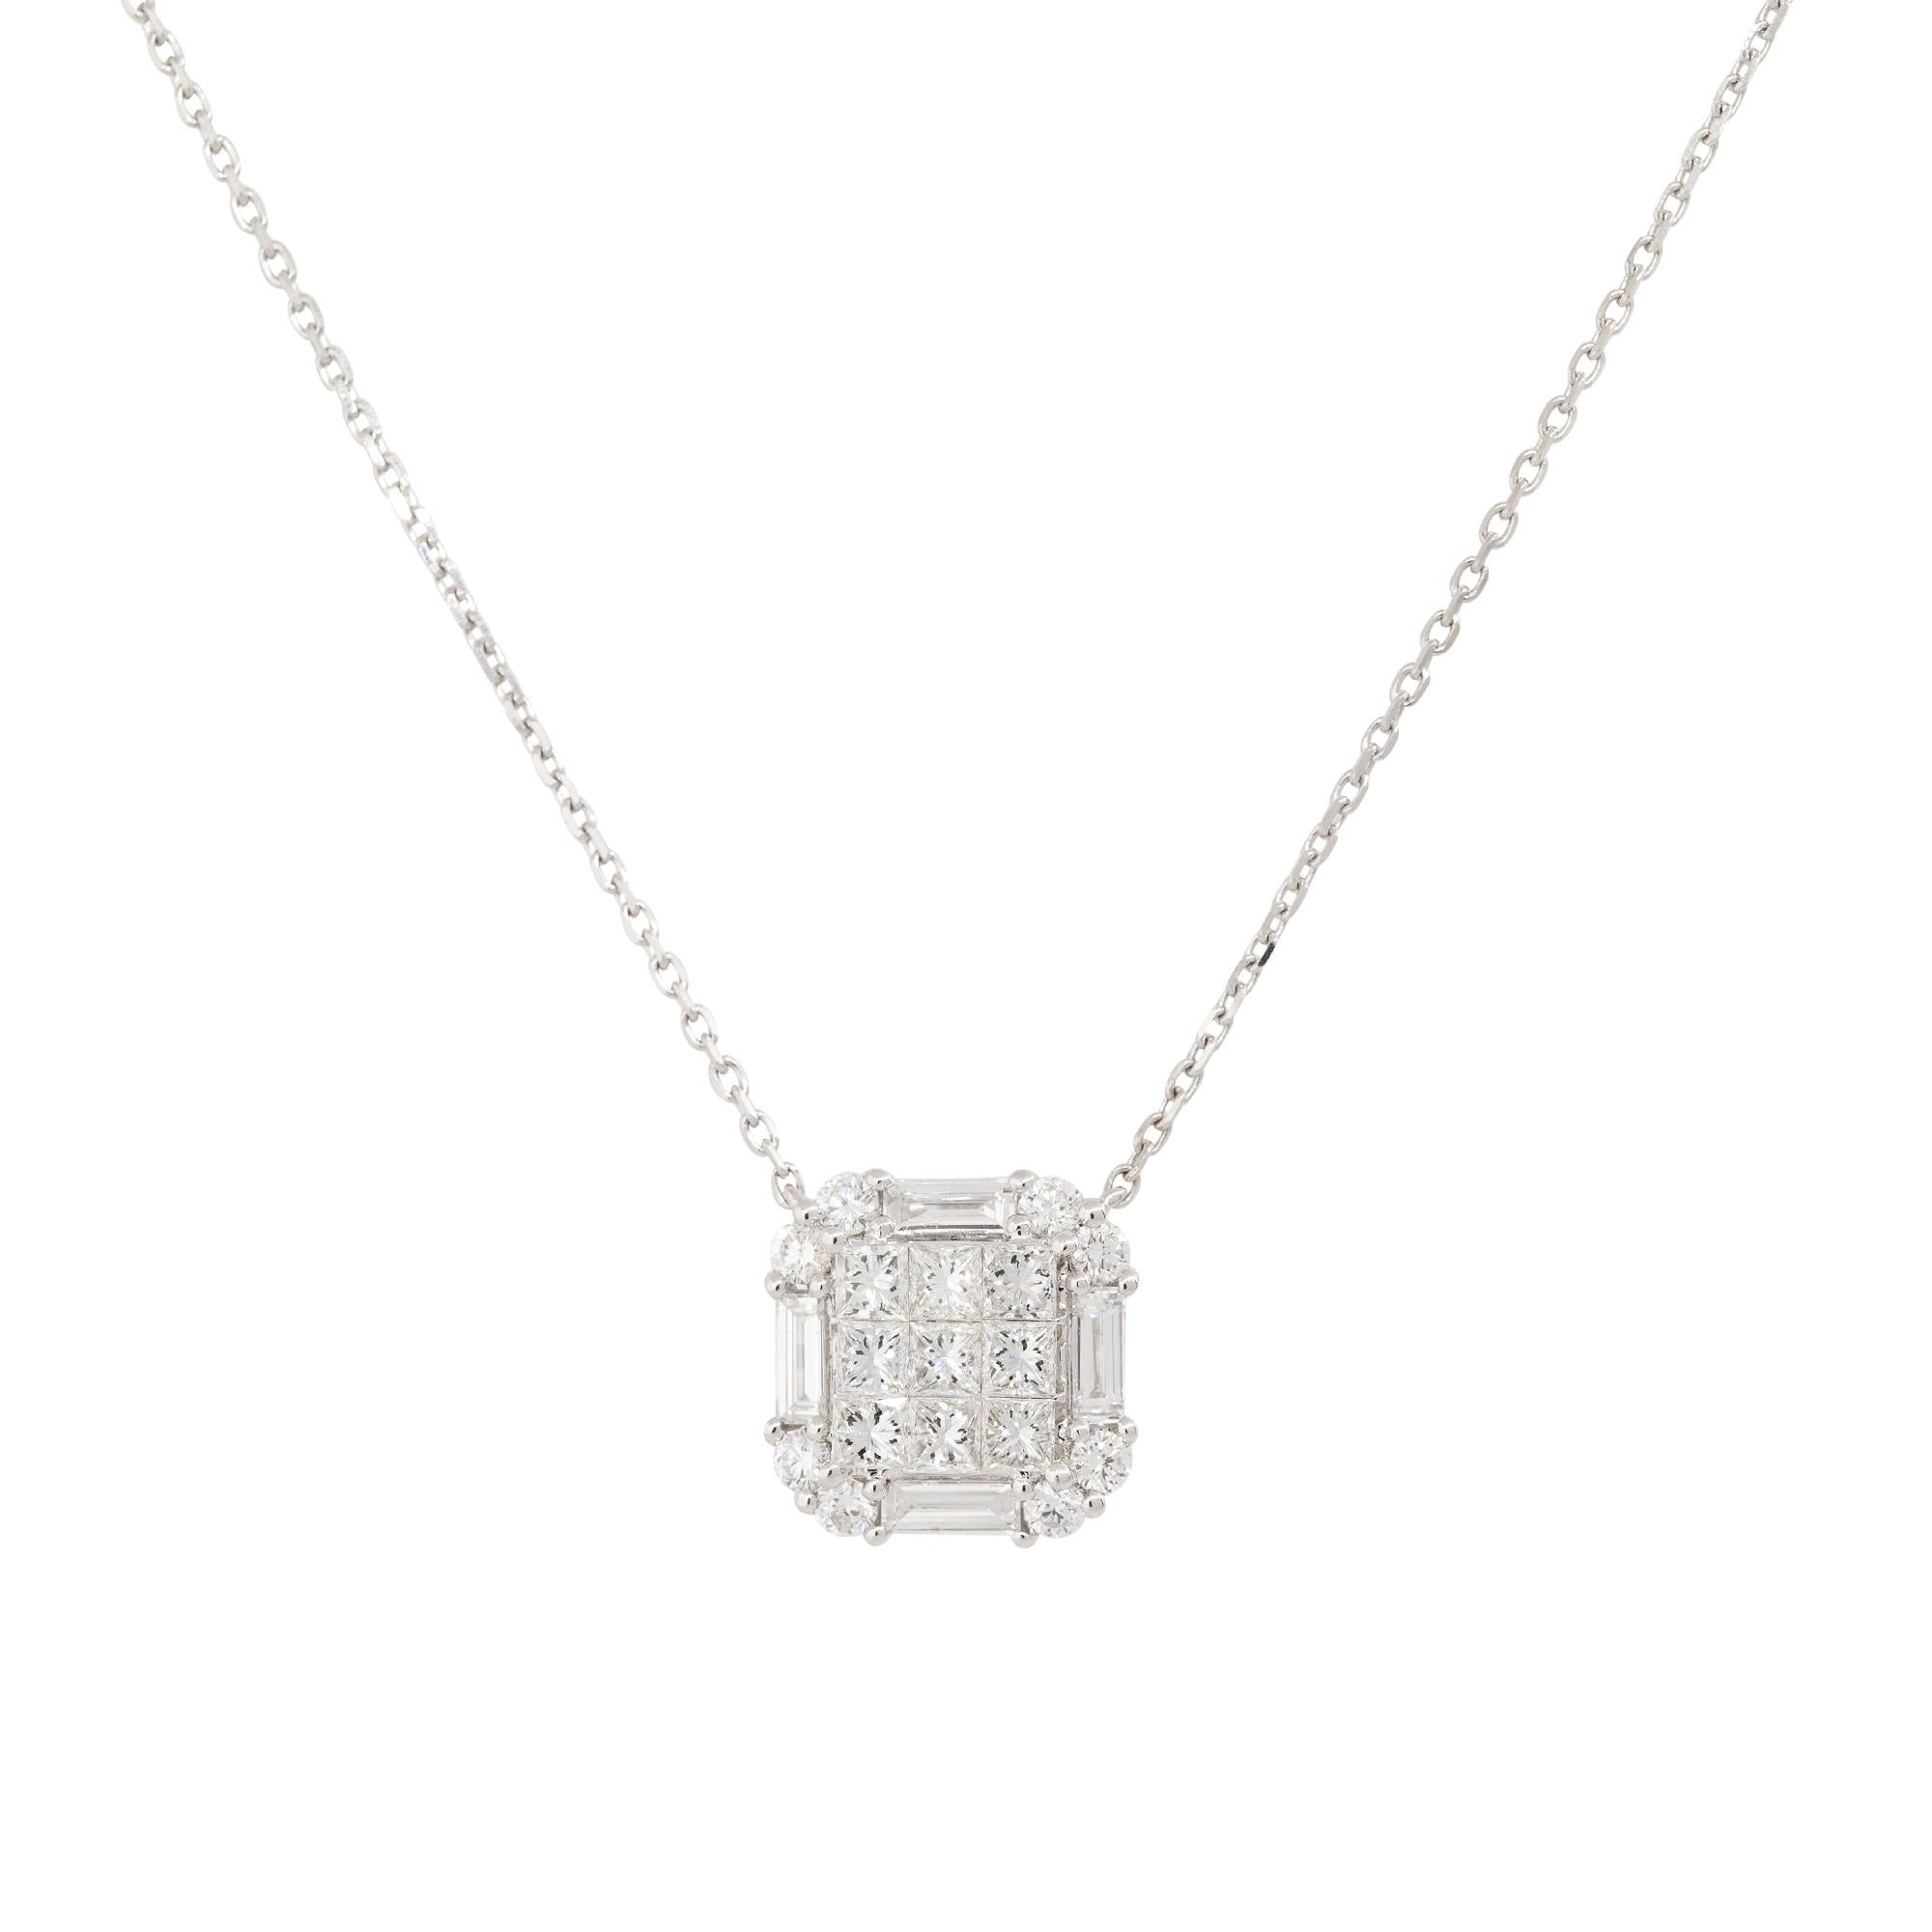 18k White Gold 1.87ctw Princess Cut Diamond Pendant Necklace
Material: 18k White Gold
Diamond Details: There are approximately 1.87 carats of invisible set diamonds. There are Princess cut diamonds in the center of the pendant surrounded by Baguette